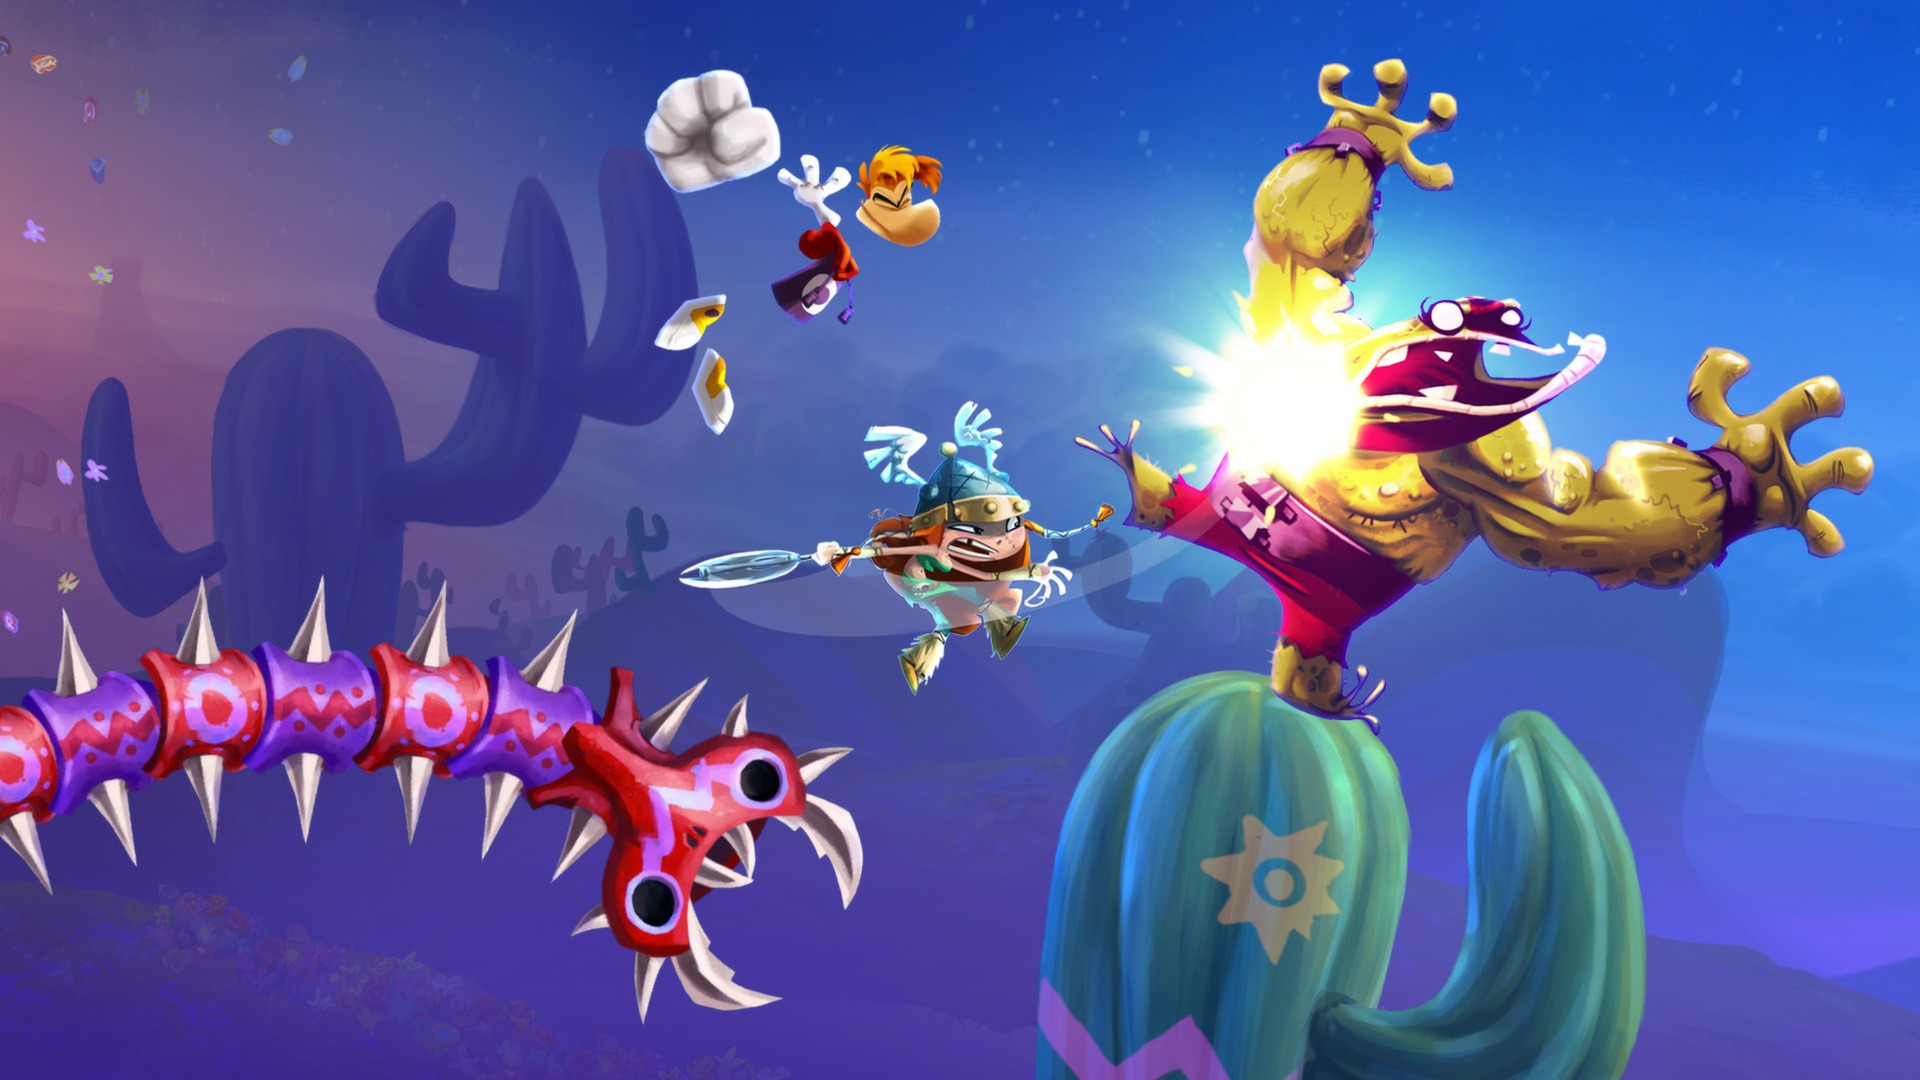 Rayman Legends System Requirements - Can I Run It? - PCGameBenchmark